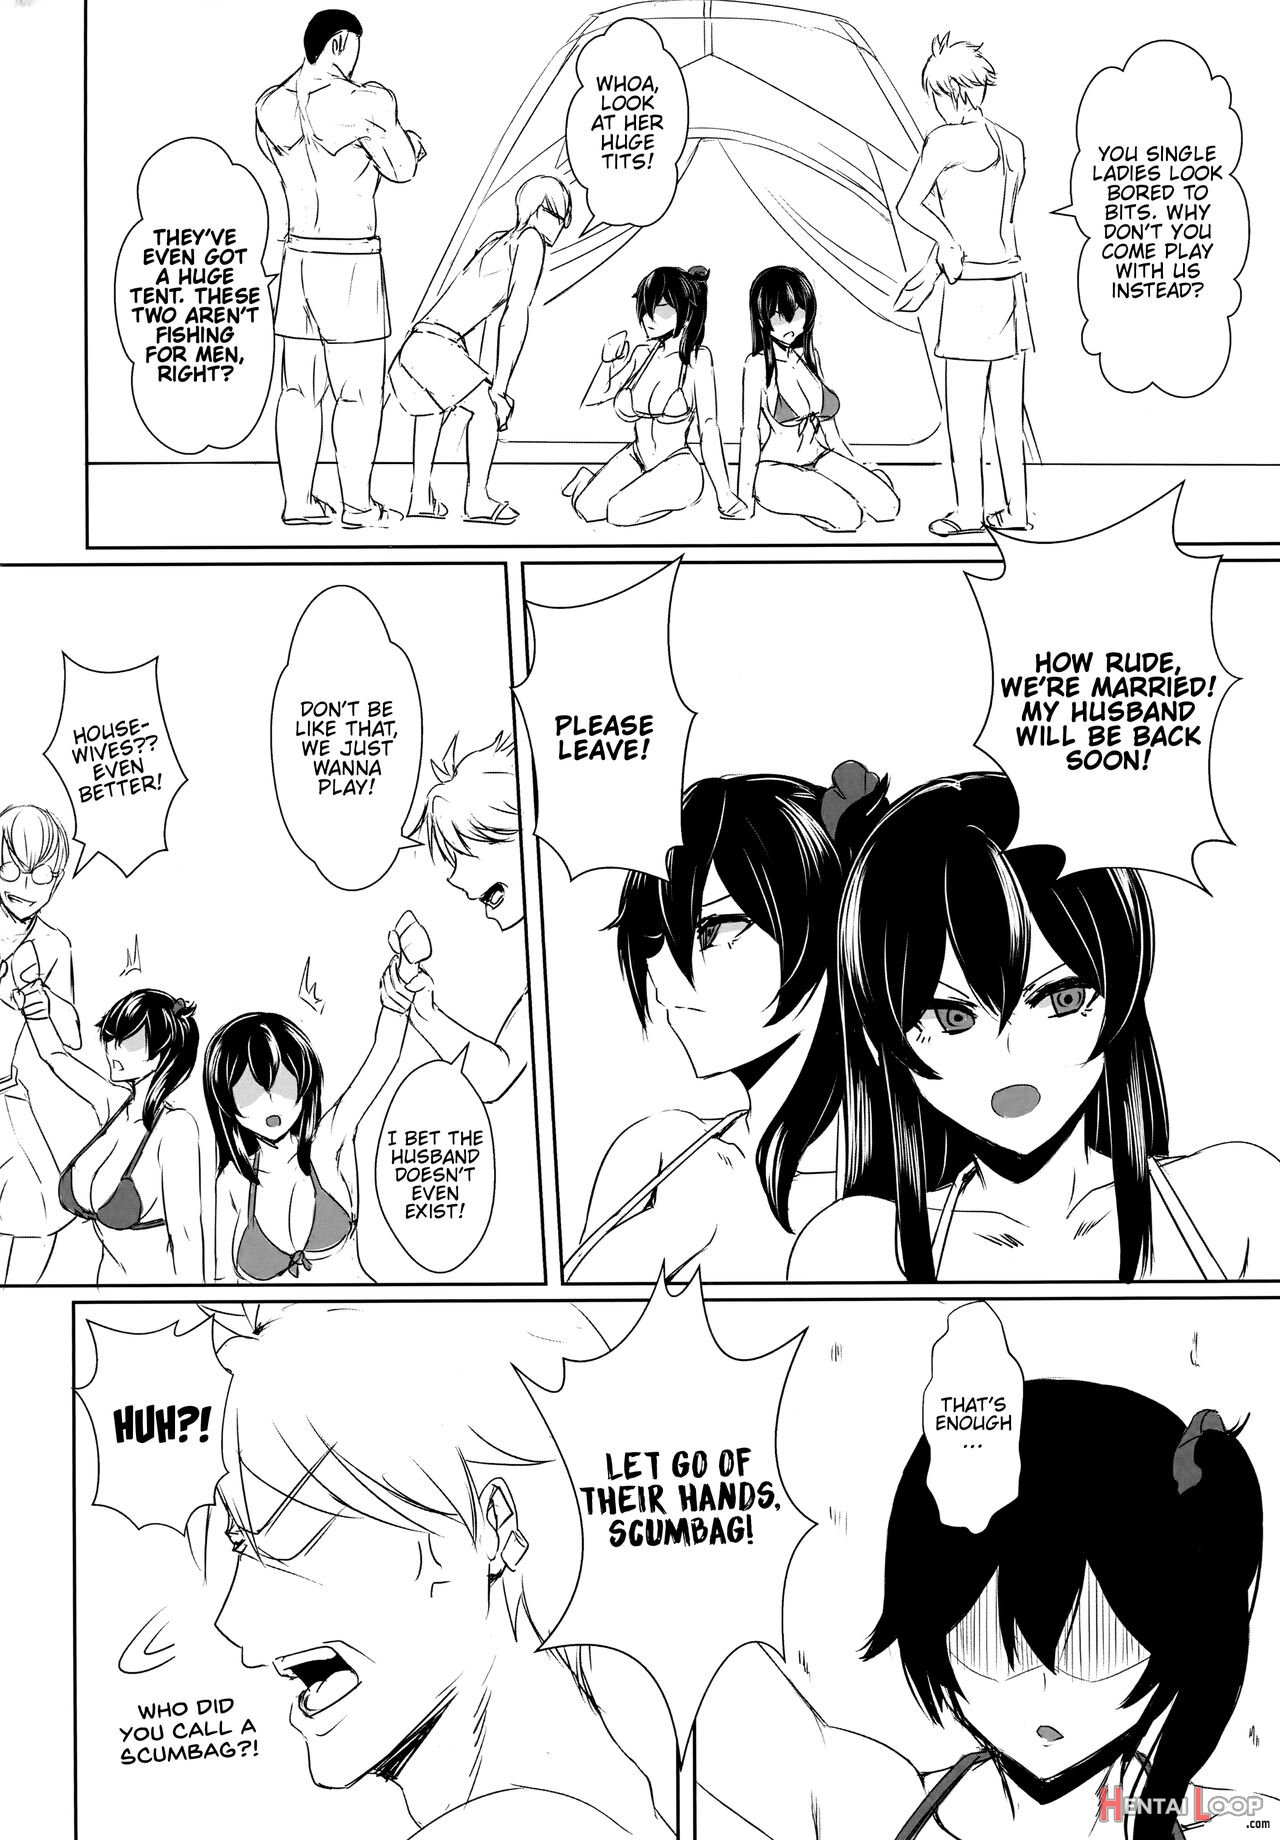 Summer With Fleet Carrier Wives page 7